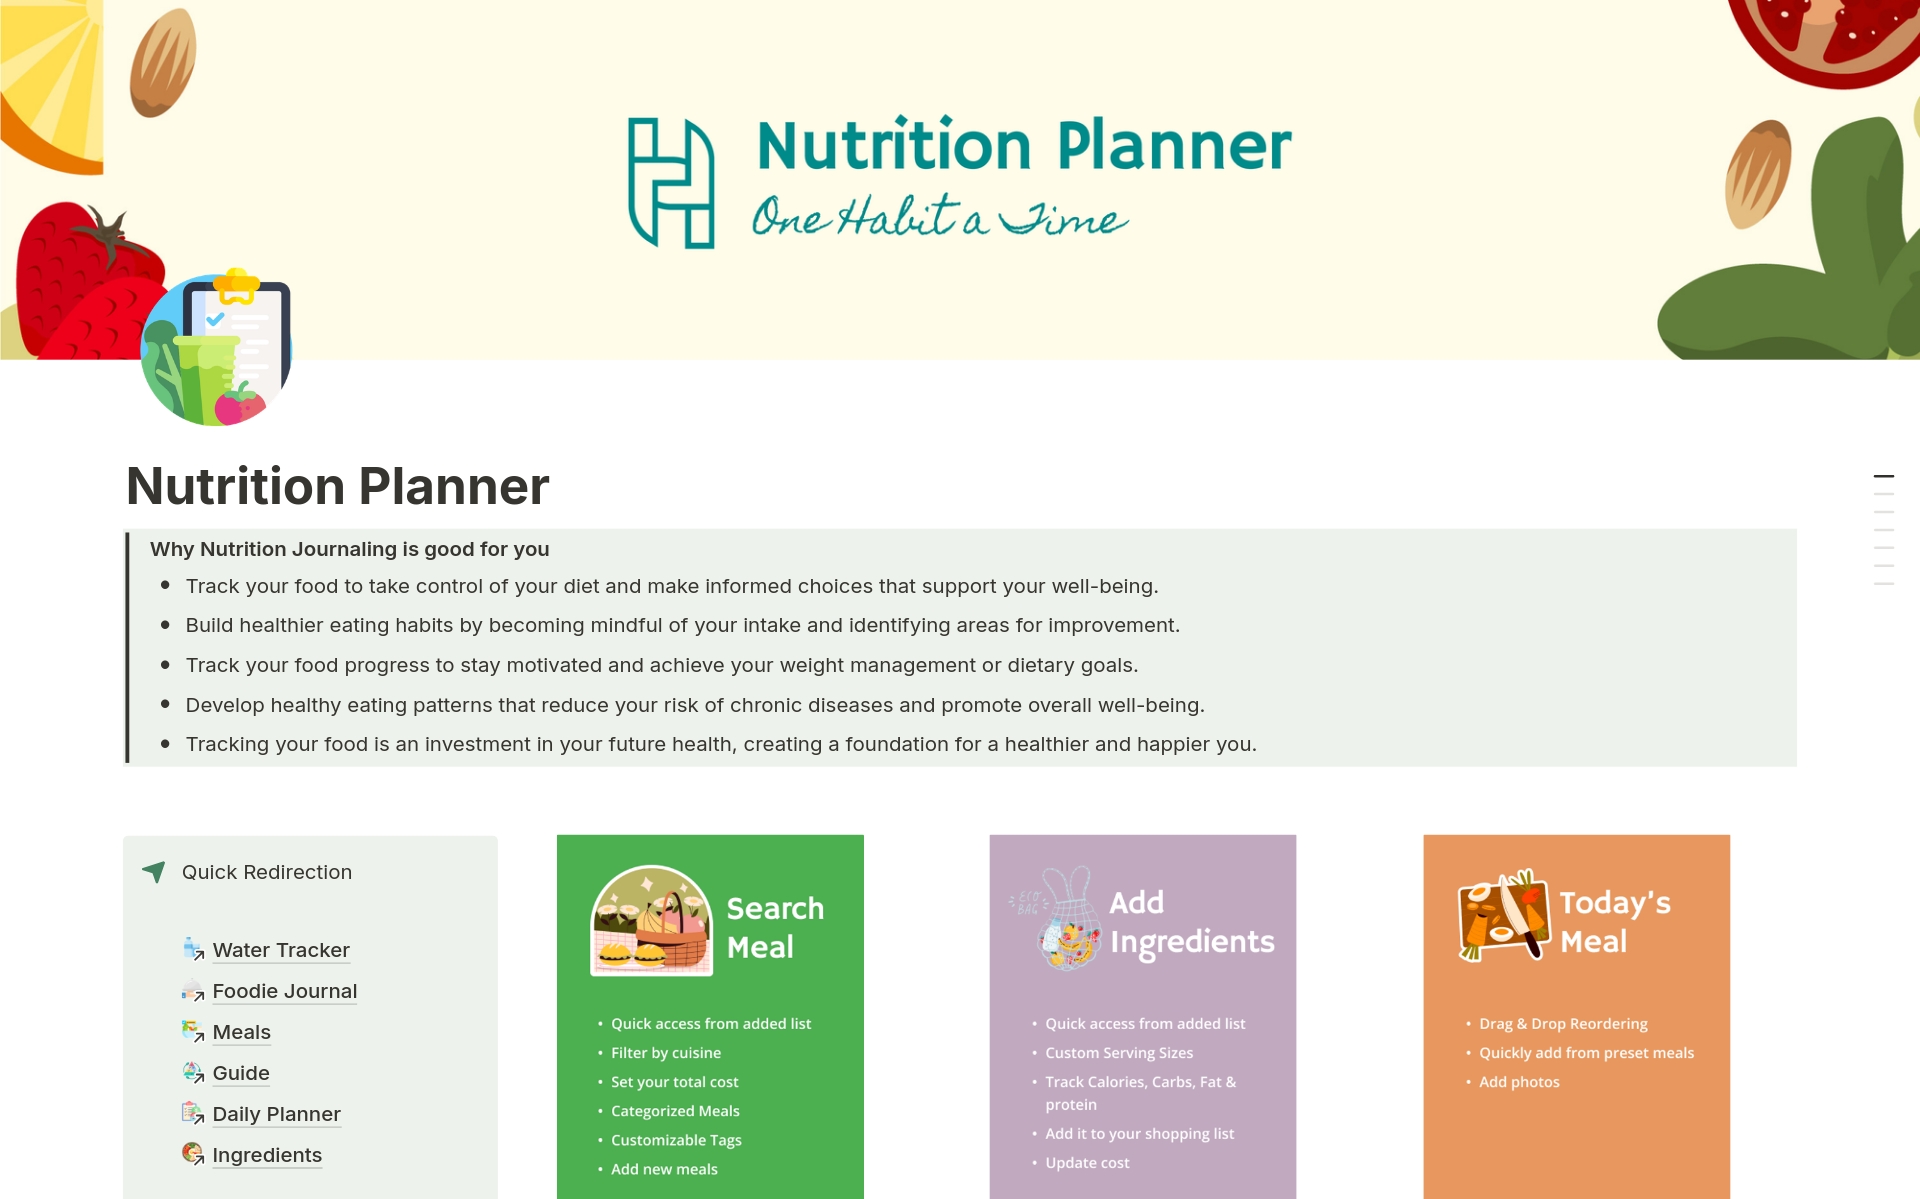 This is designed to help you stay on top of your health and nutrition goals. With exciting features like a water tracker, foodie journal, meals log, shopping list, nutrition guide, daily planner, ingredient management and fasting log- this template ensures you are fit and fine.